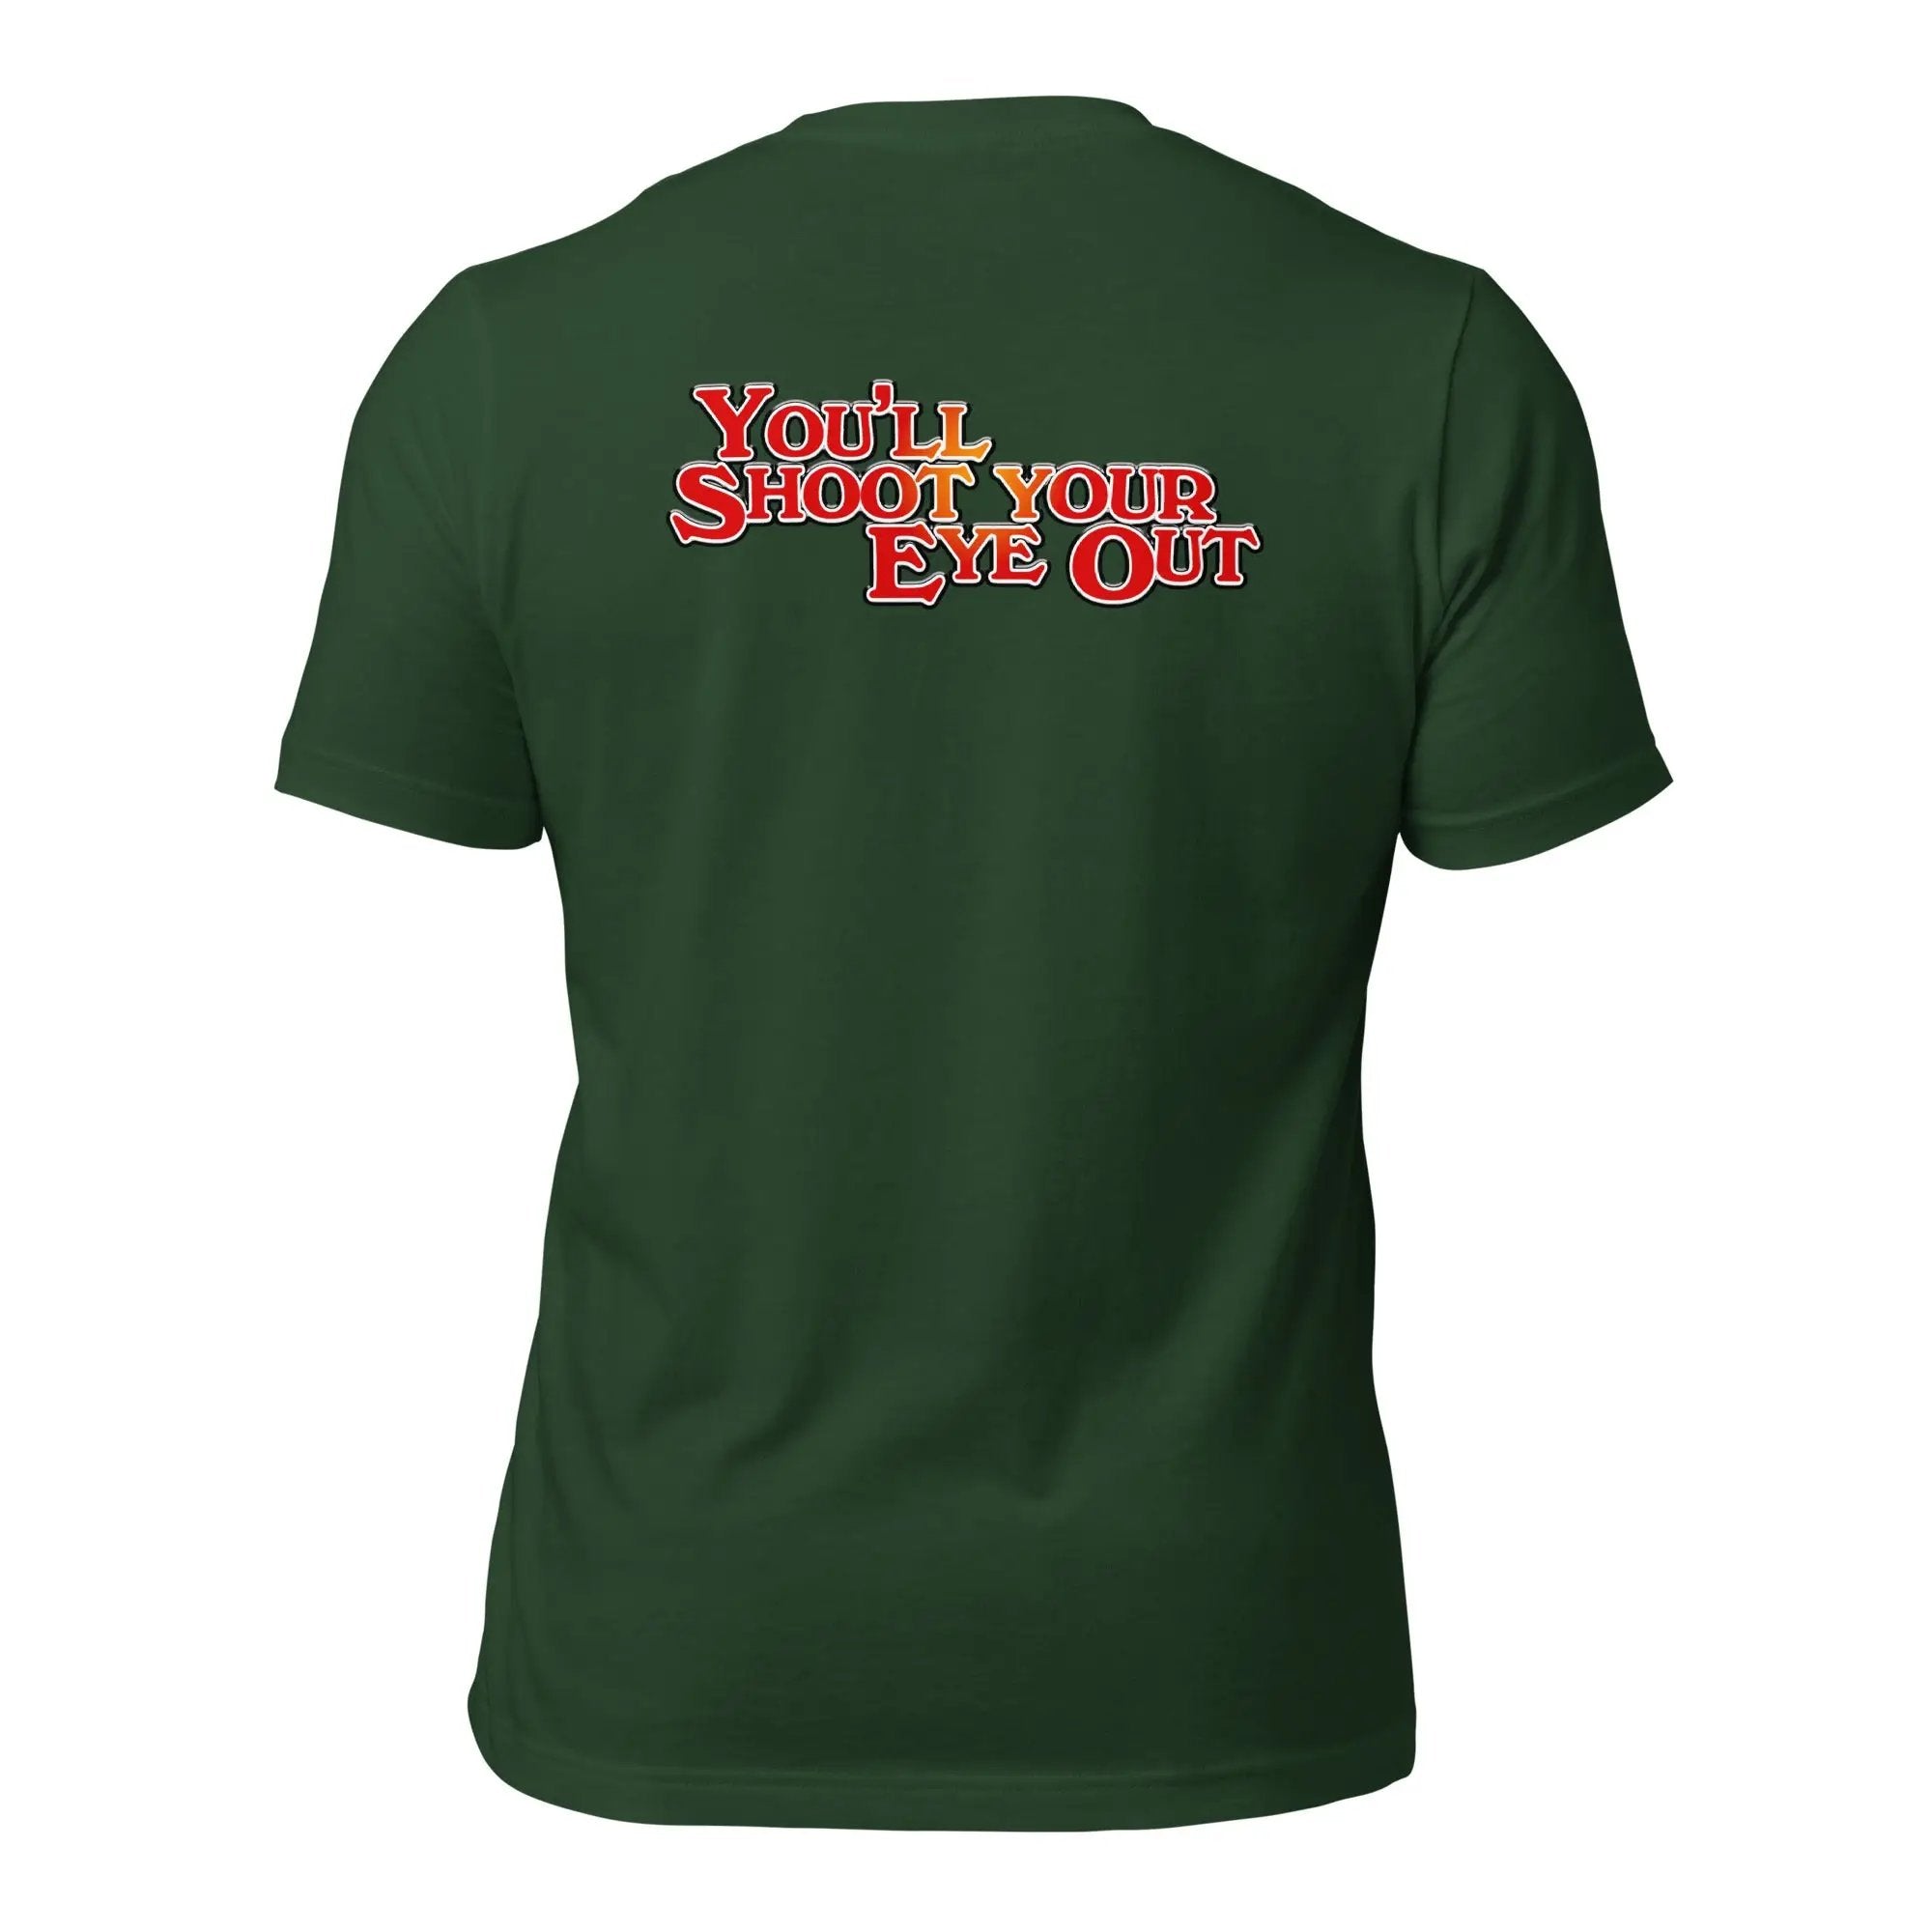 a green t - shirt with the words you shoot your eye out on it